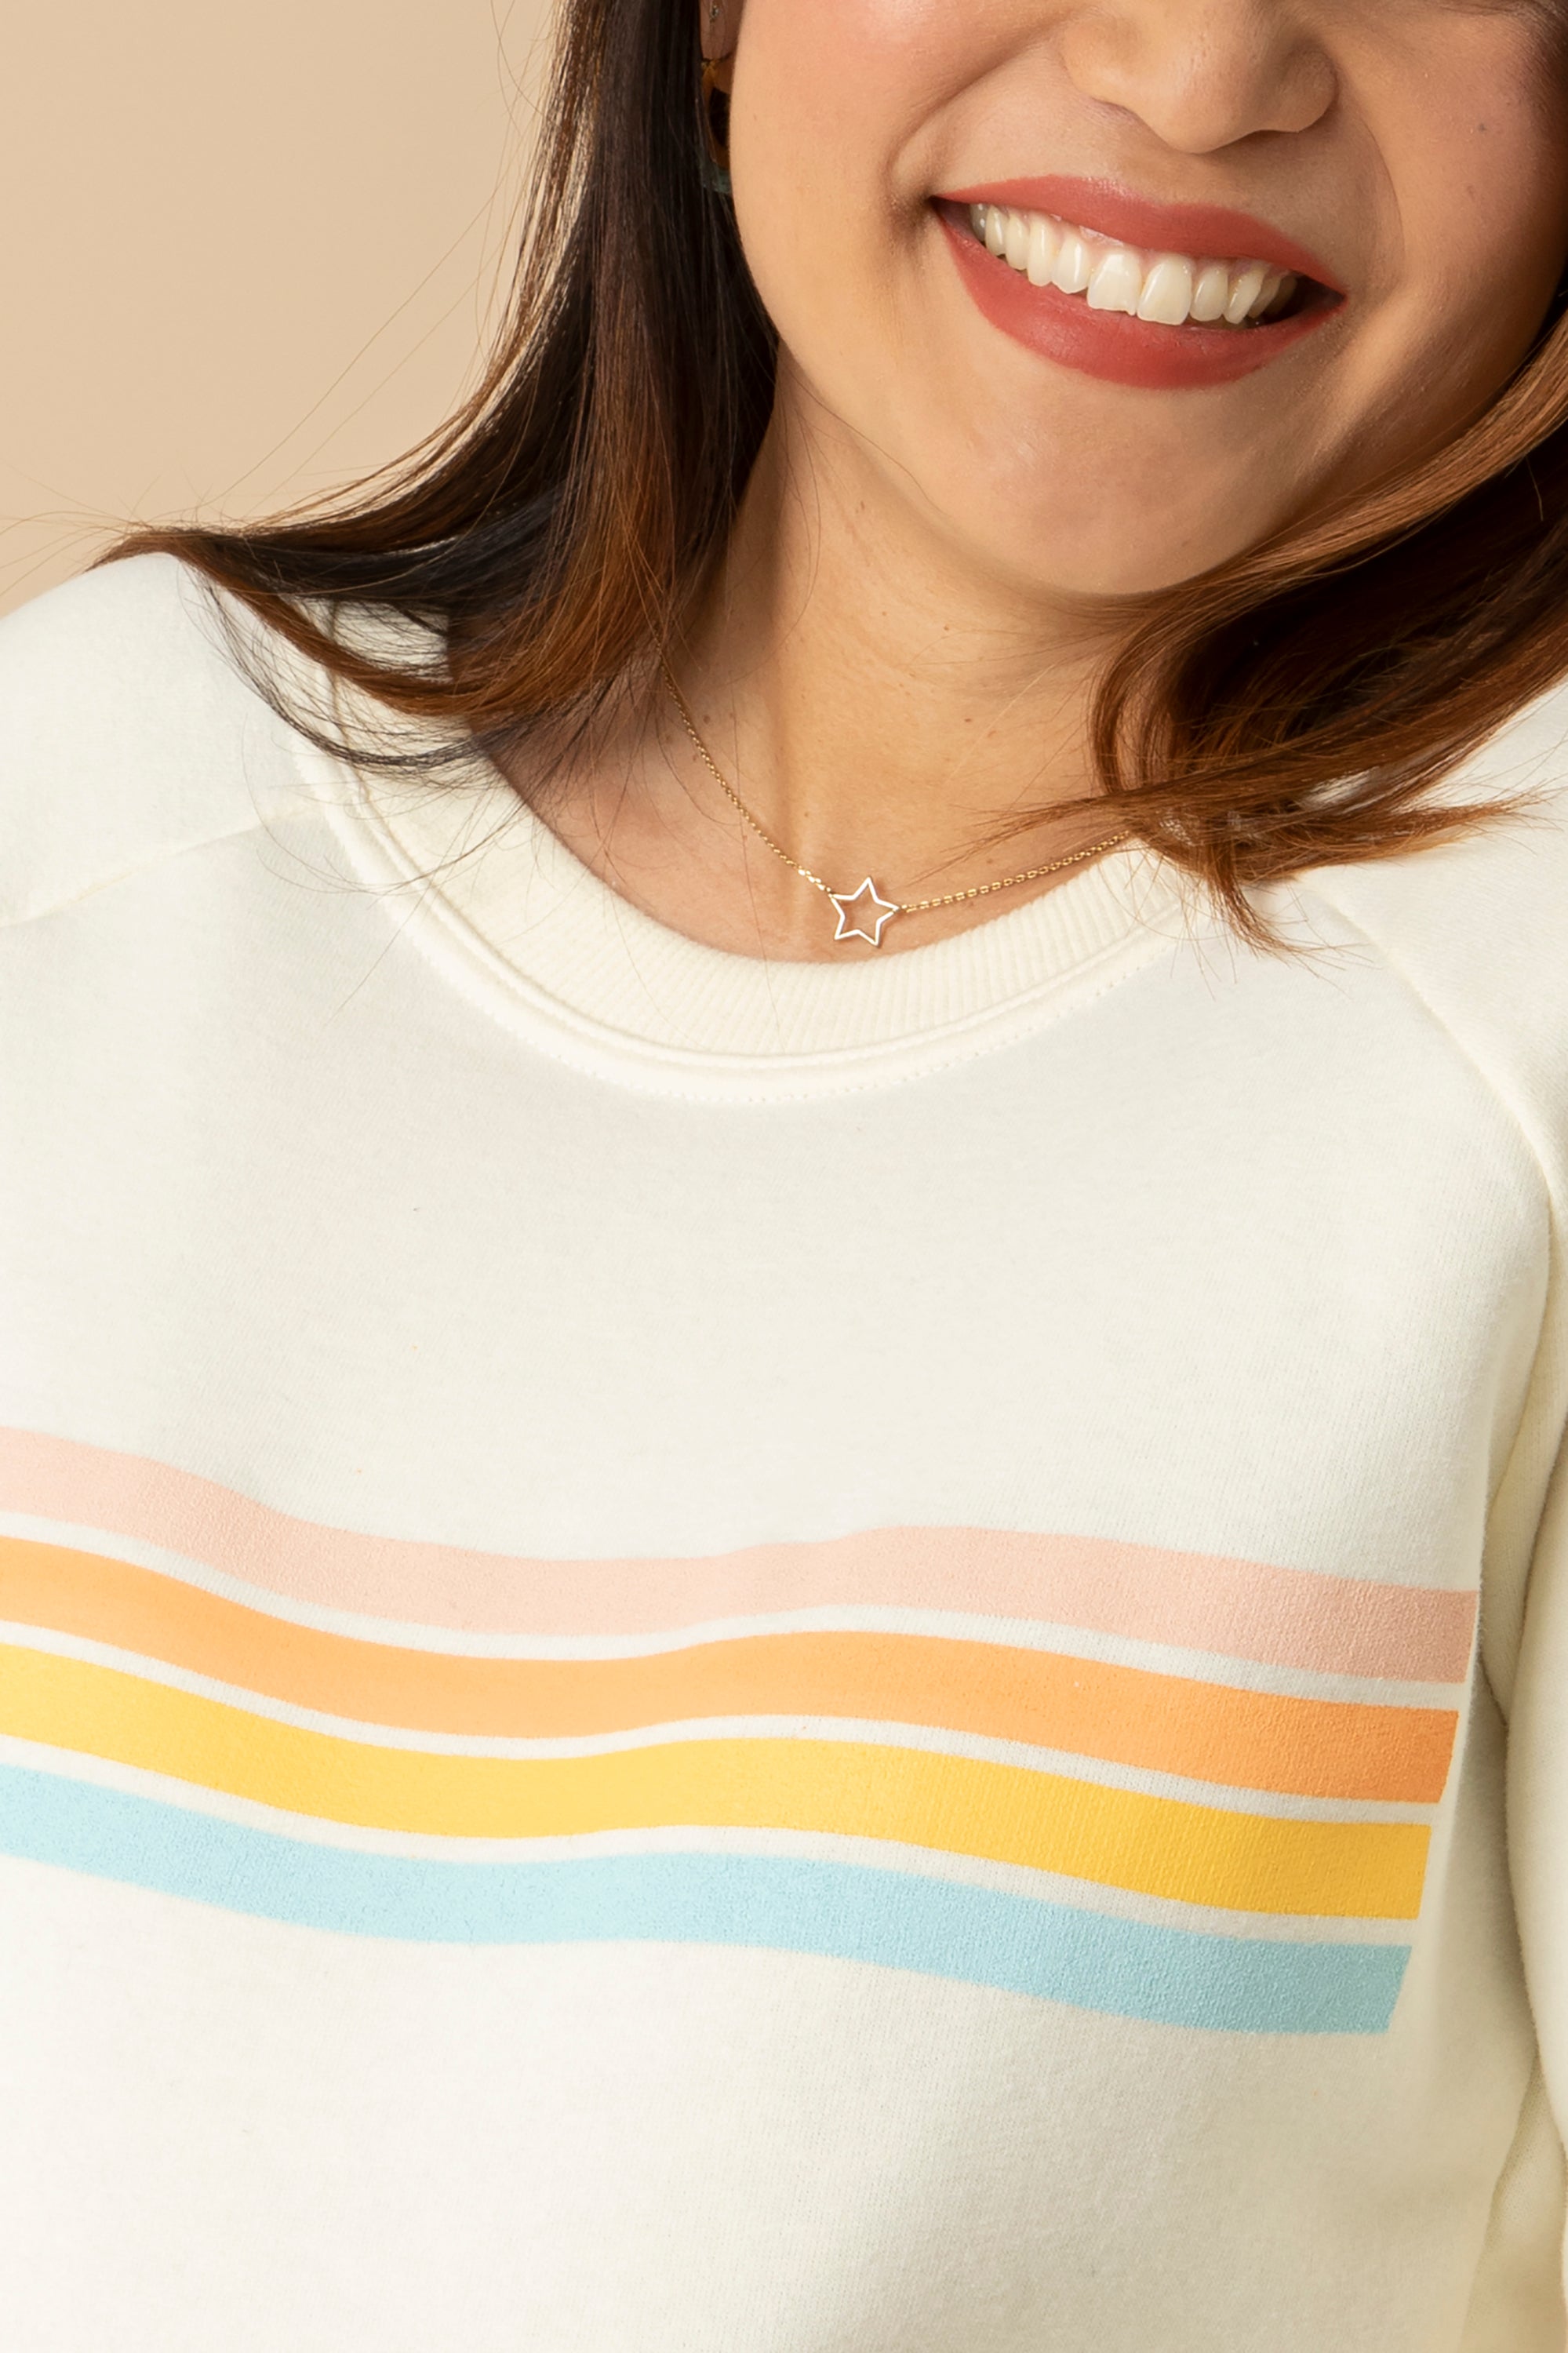 Super cosy maternity sweatshirt in pastel stripes to brighten up and add a little luxury to your pregnancy wardrobe. Relaxed-fit to elevate your everyday maternity loungewear in lightweight cotton fabric. 